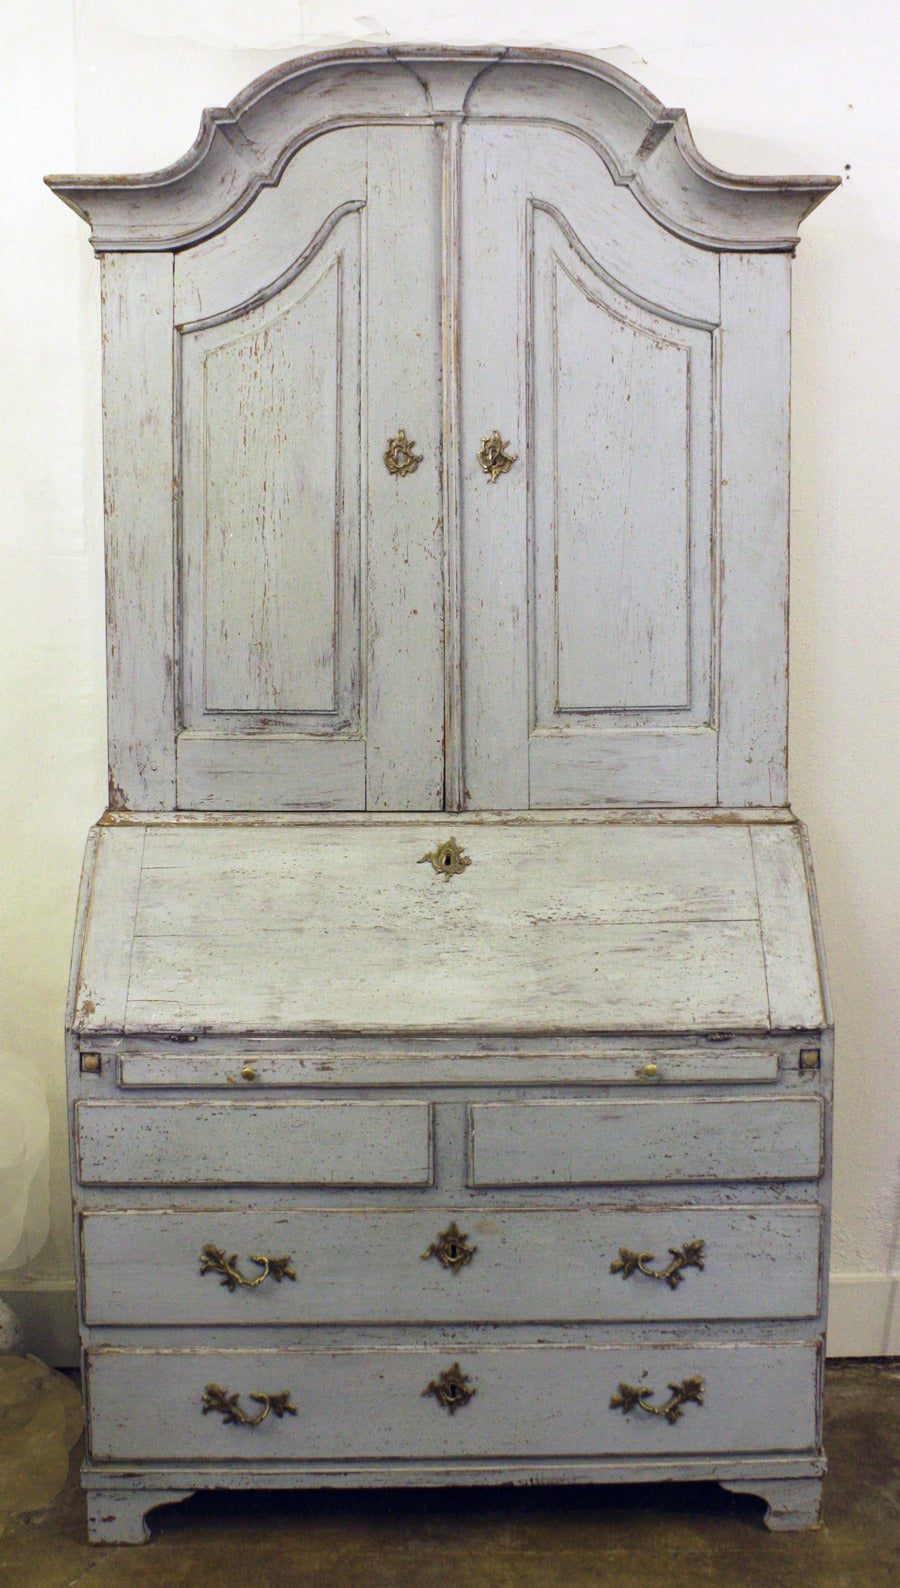 18th century Gustavian secretaire with original blue or gray and off white paint and original hardware.